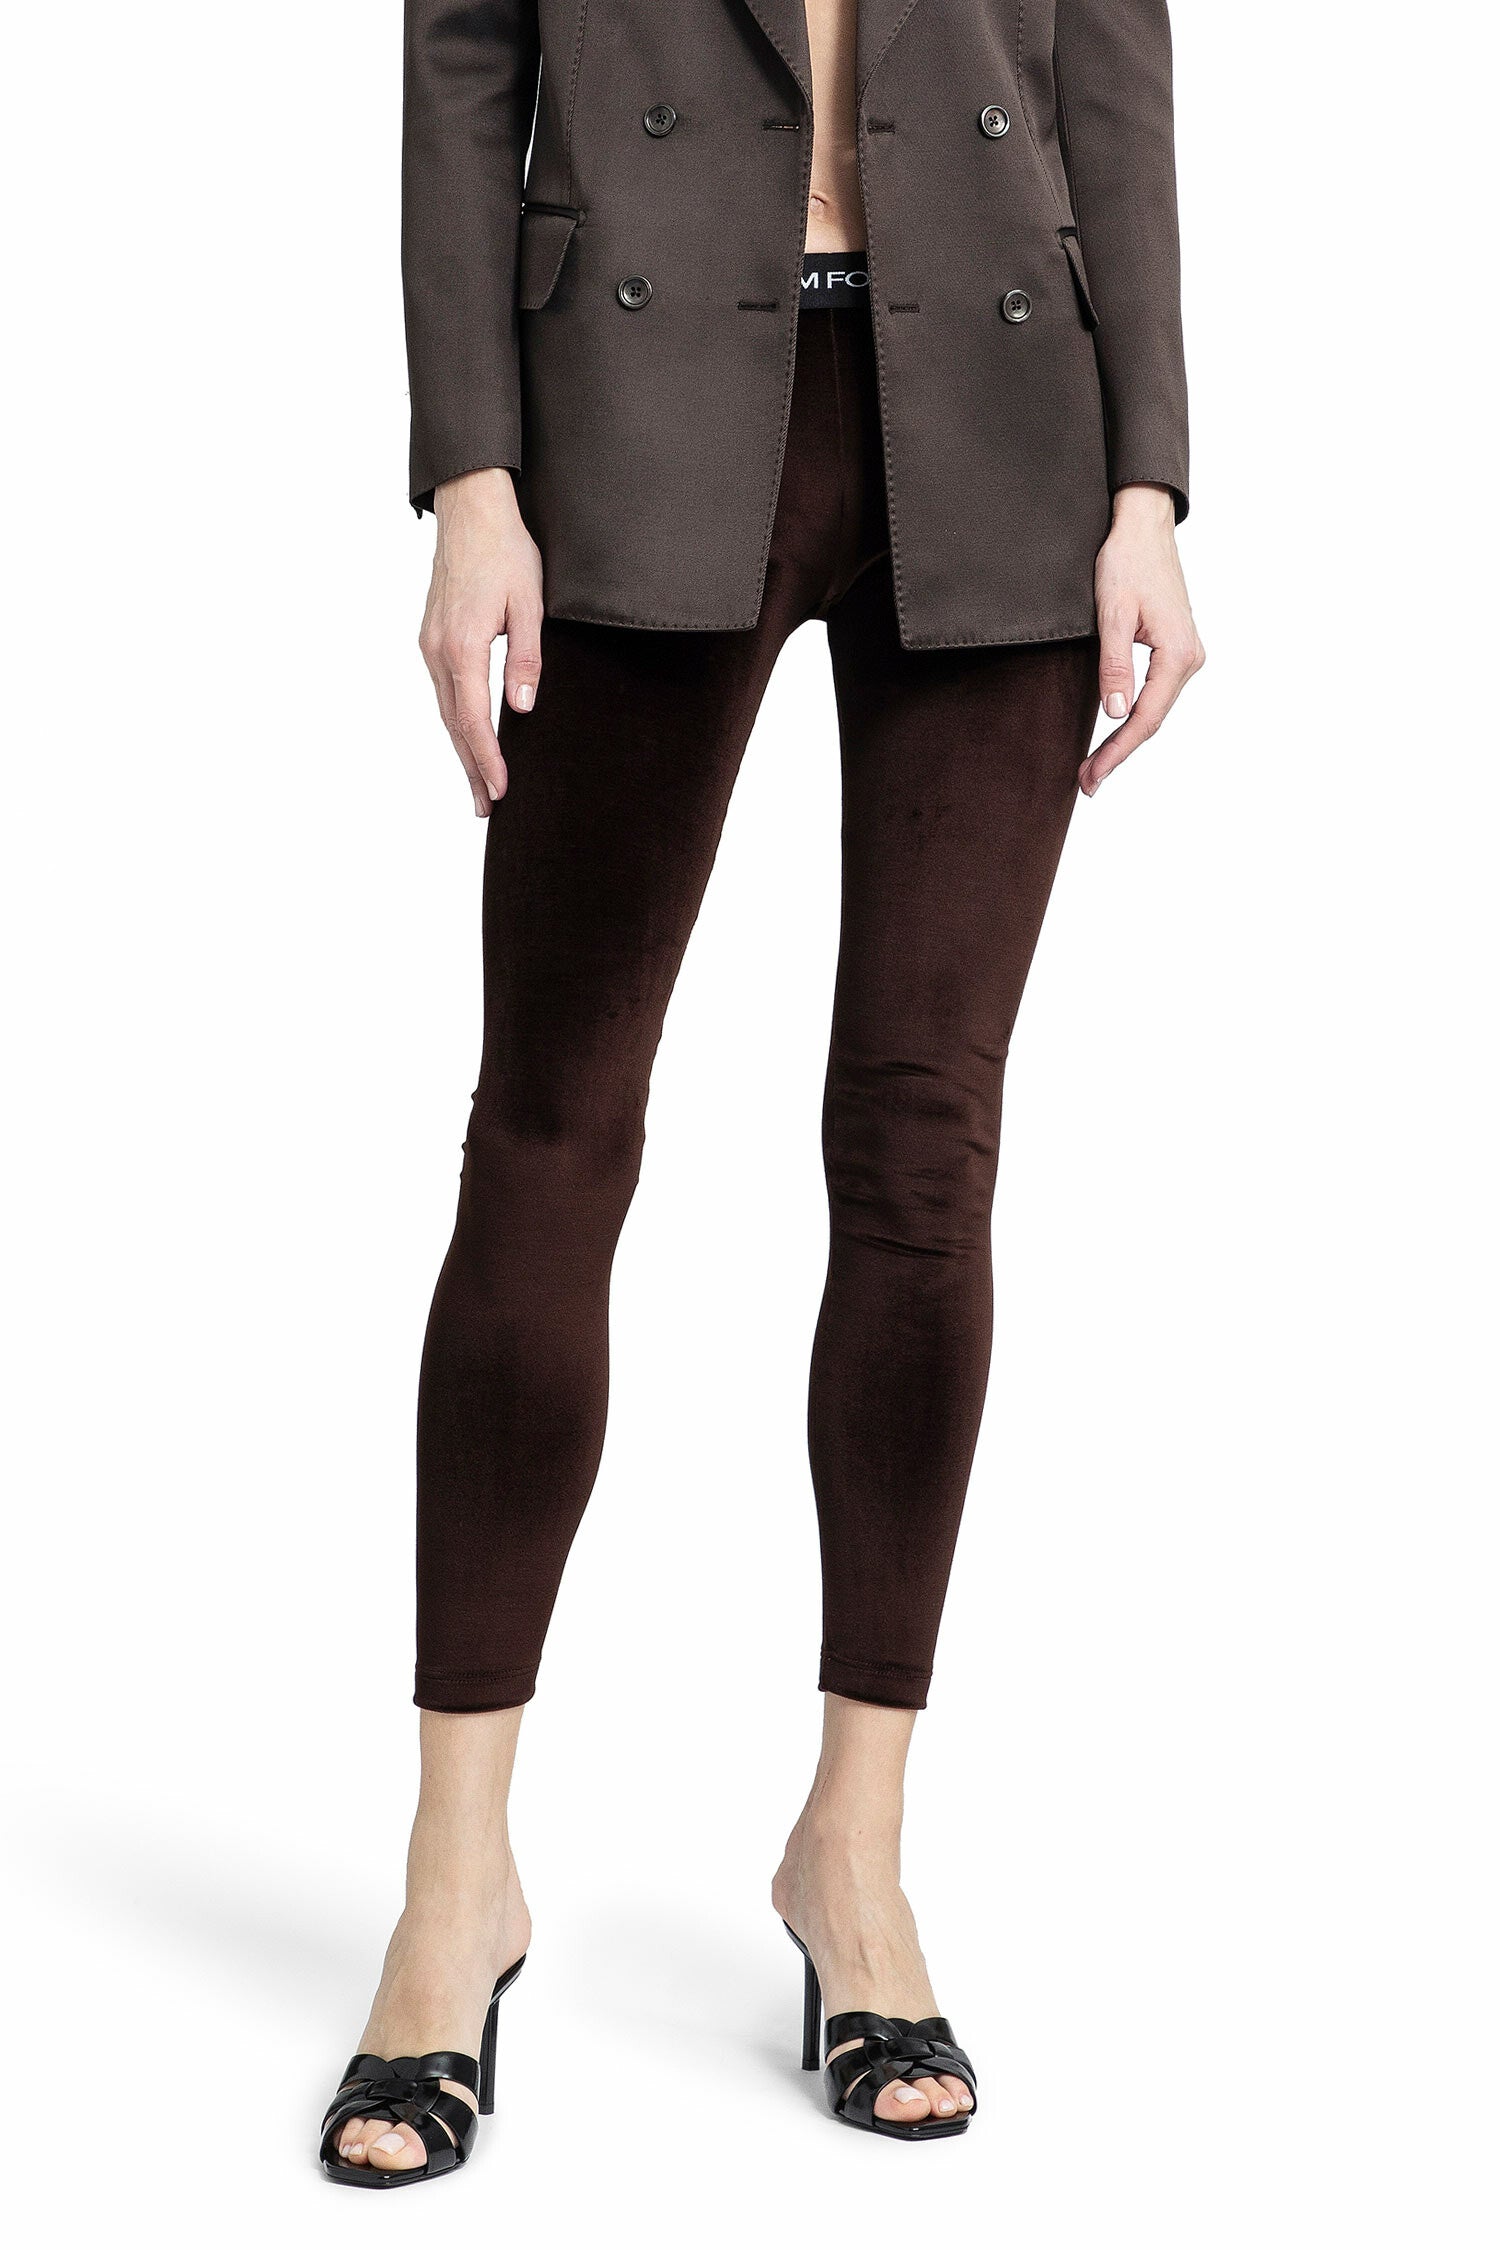 TOM FORD WOMAN BROWN TROUSERS